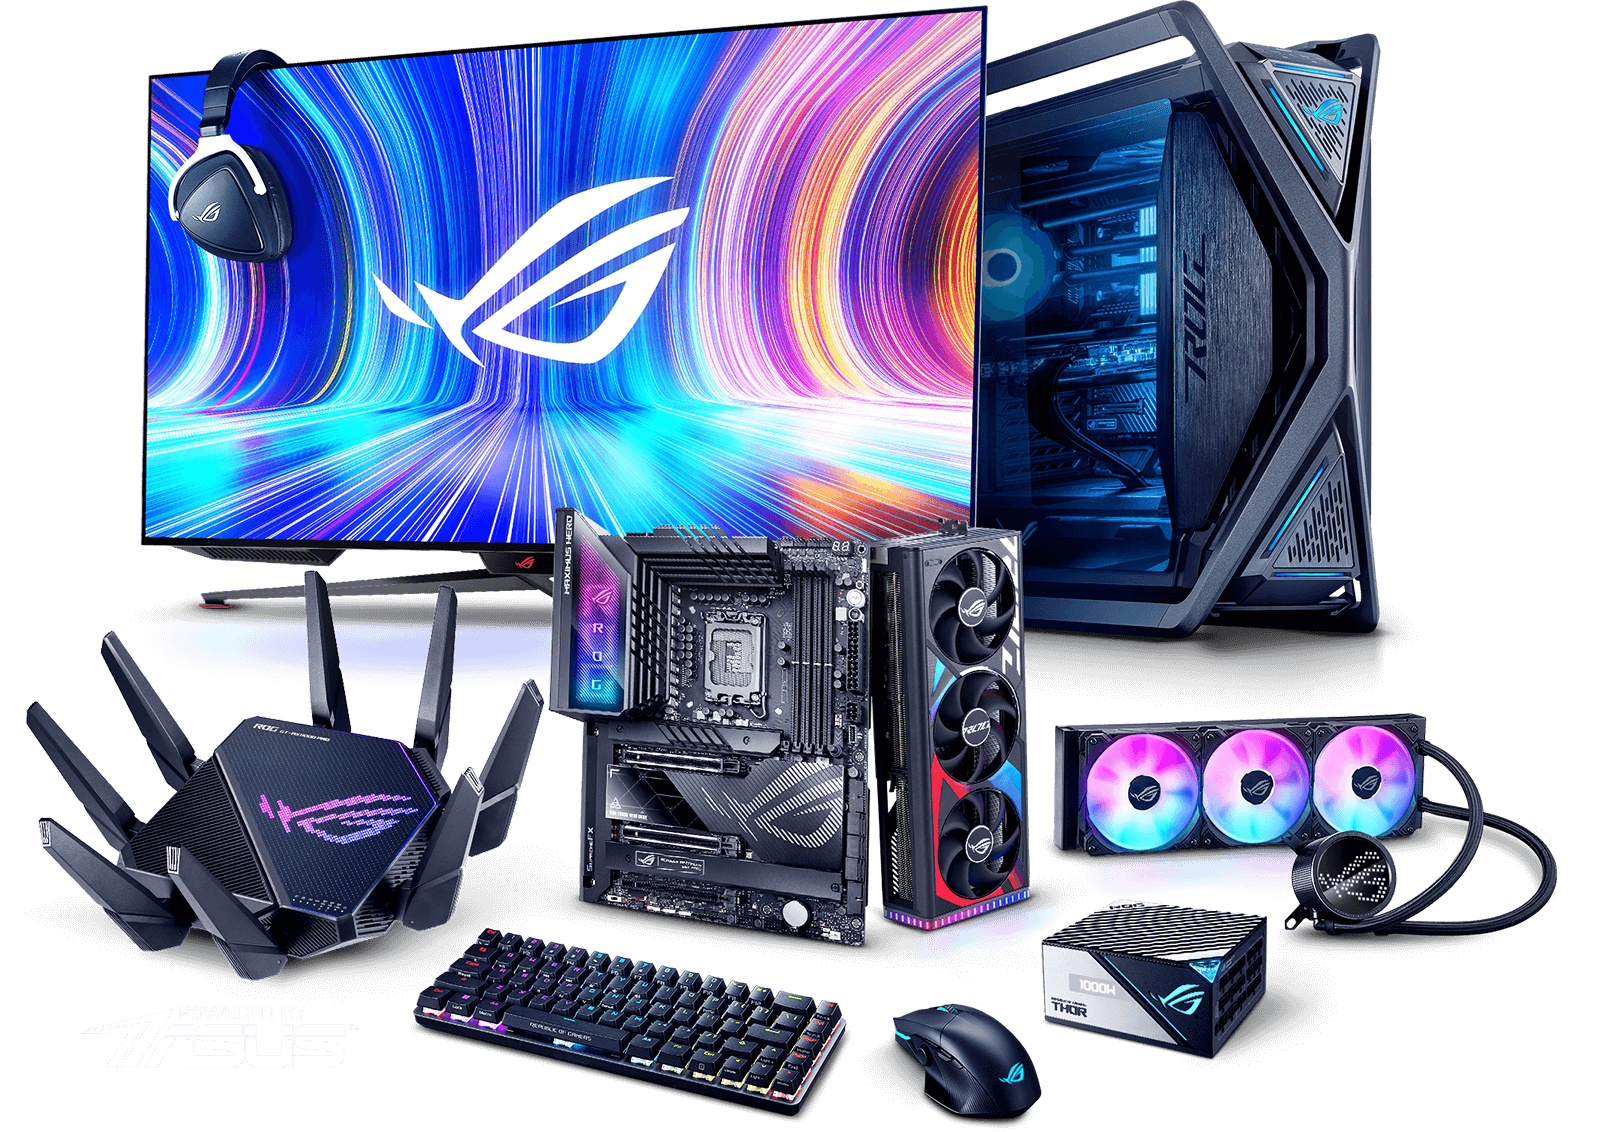 Collection of Powered by ASUS hardware with Powered by ASUS logo